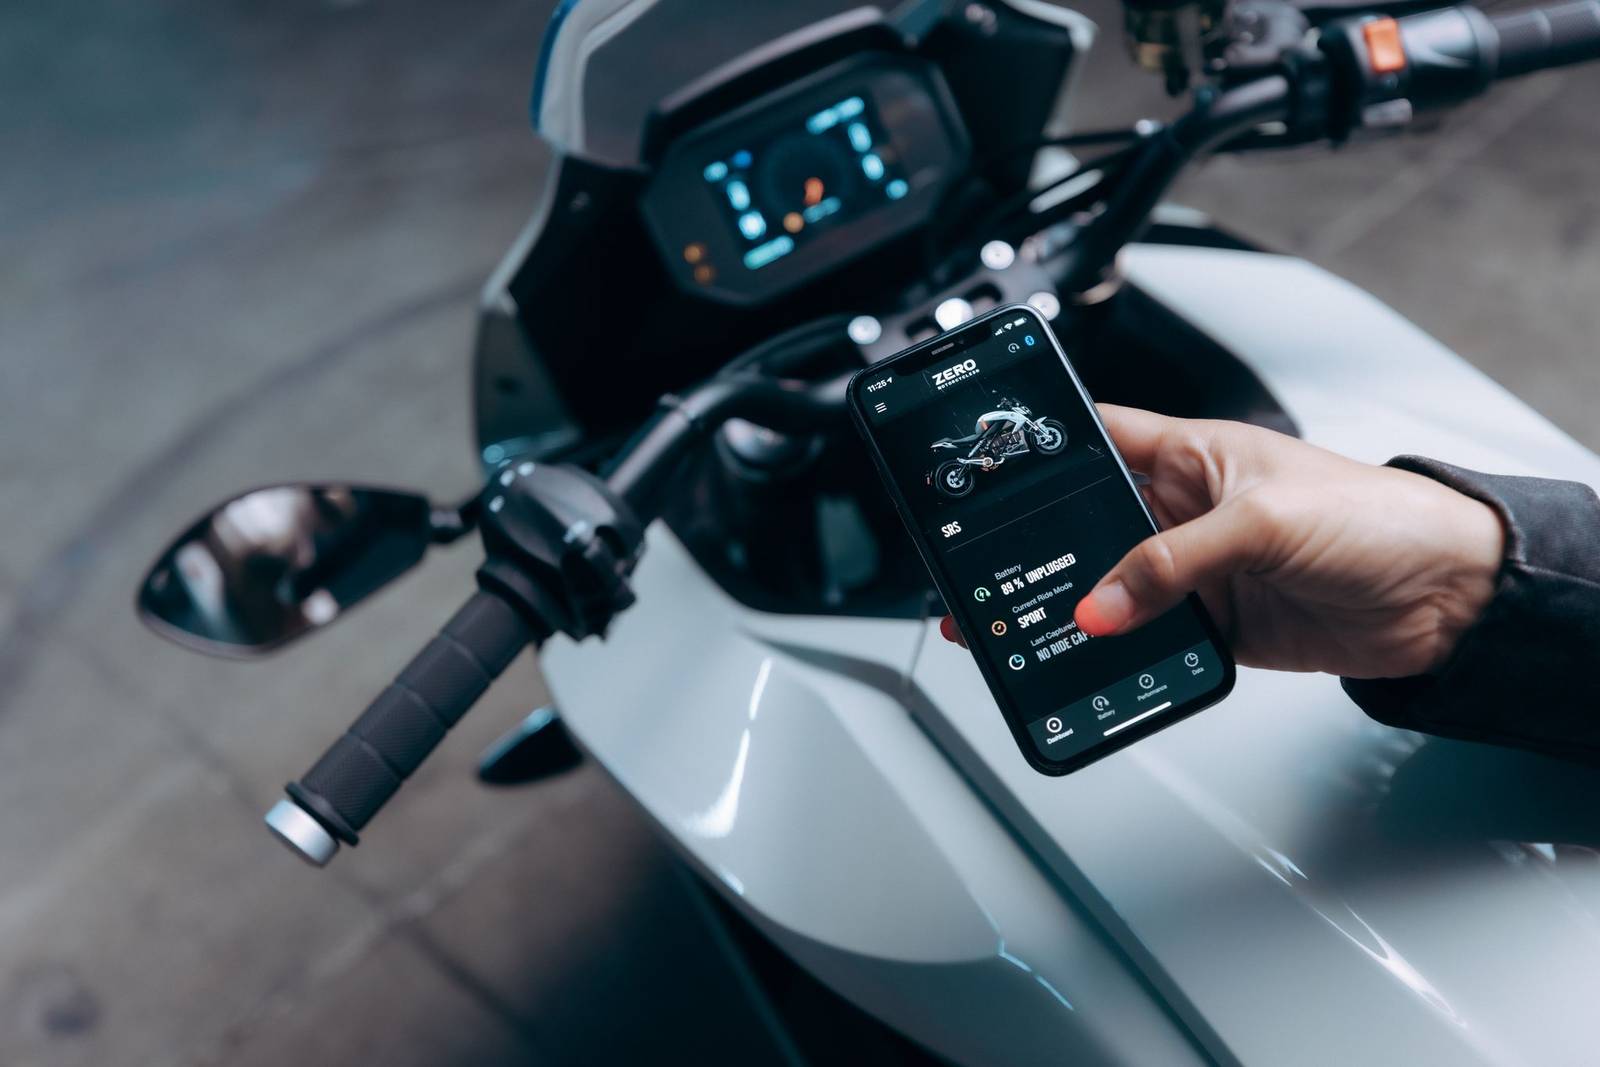 A Zero SR motorcycle featuring updates and connectivity with smartphones.